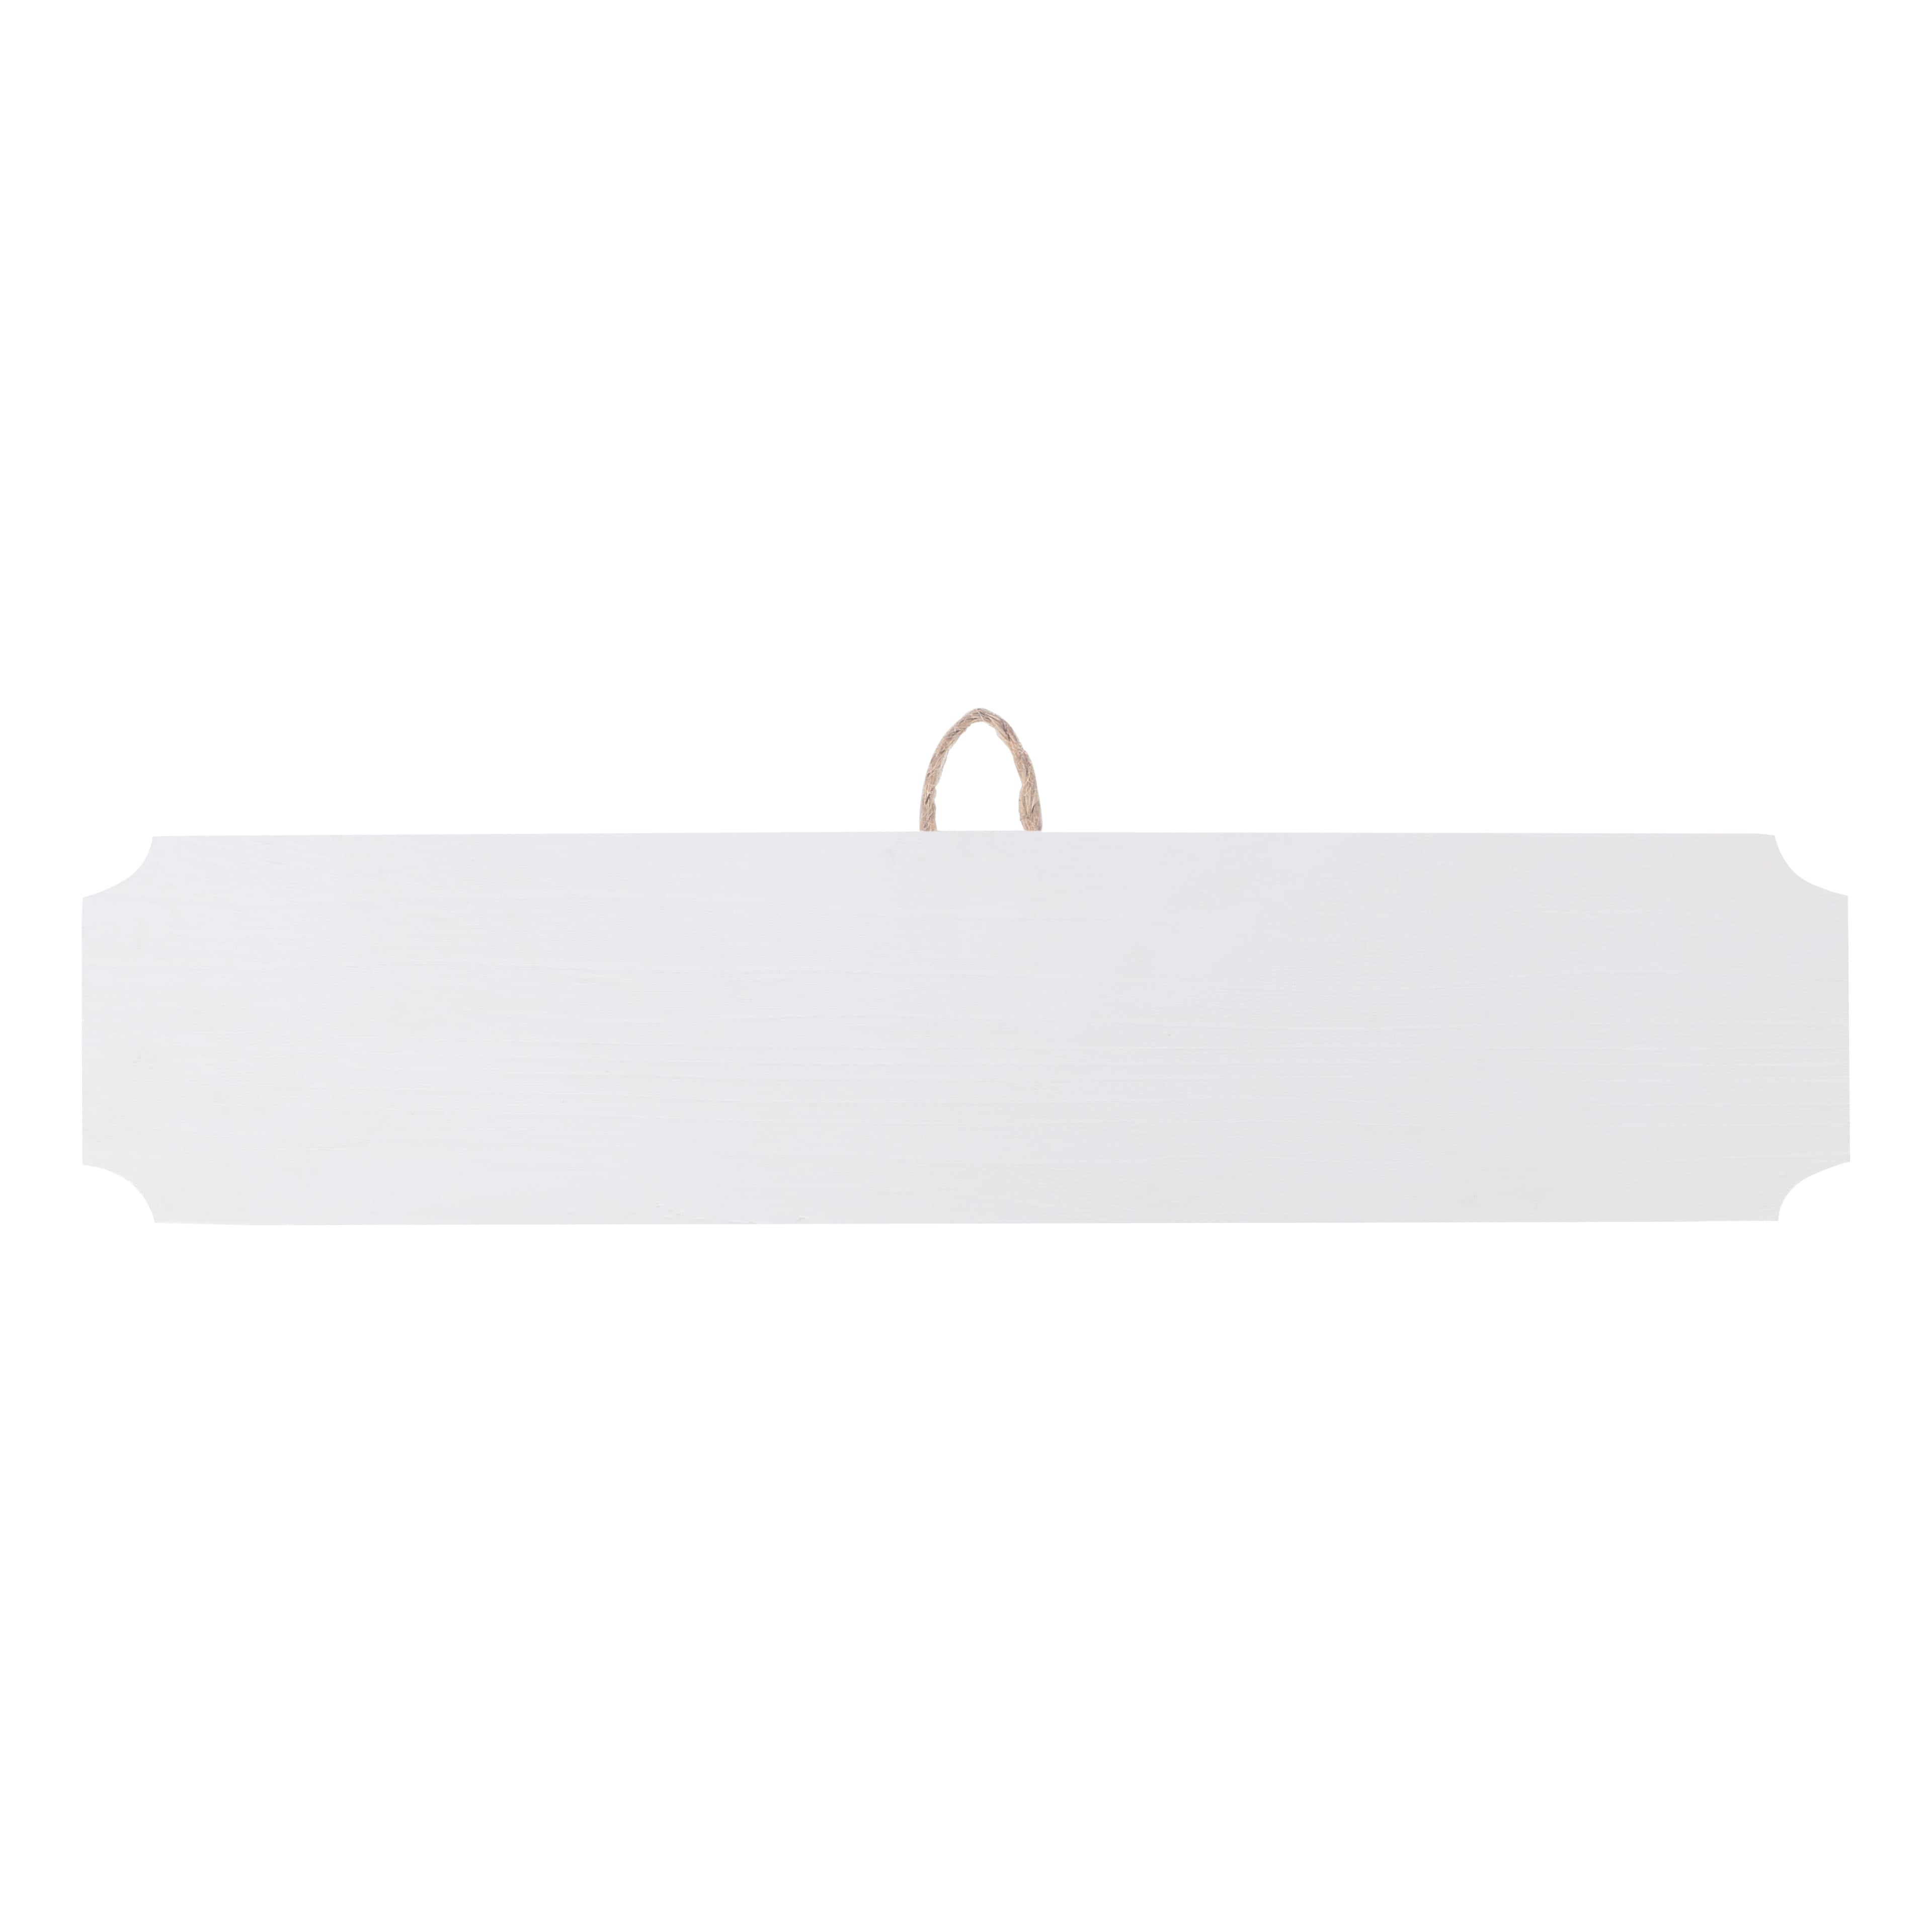 8 Pack: 18 inch x 5 inch Wood Plaque by Make Market, Size: 18” x 0.625” x 5”, Beige